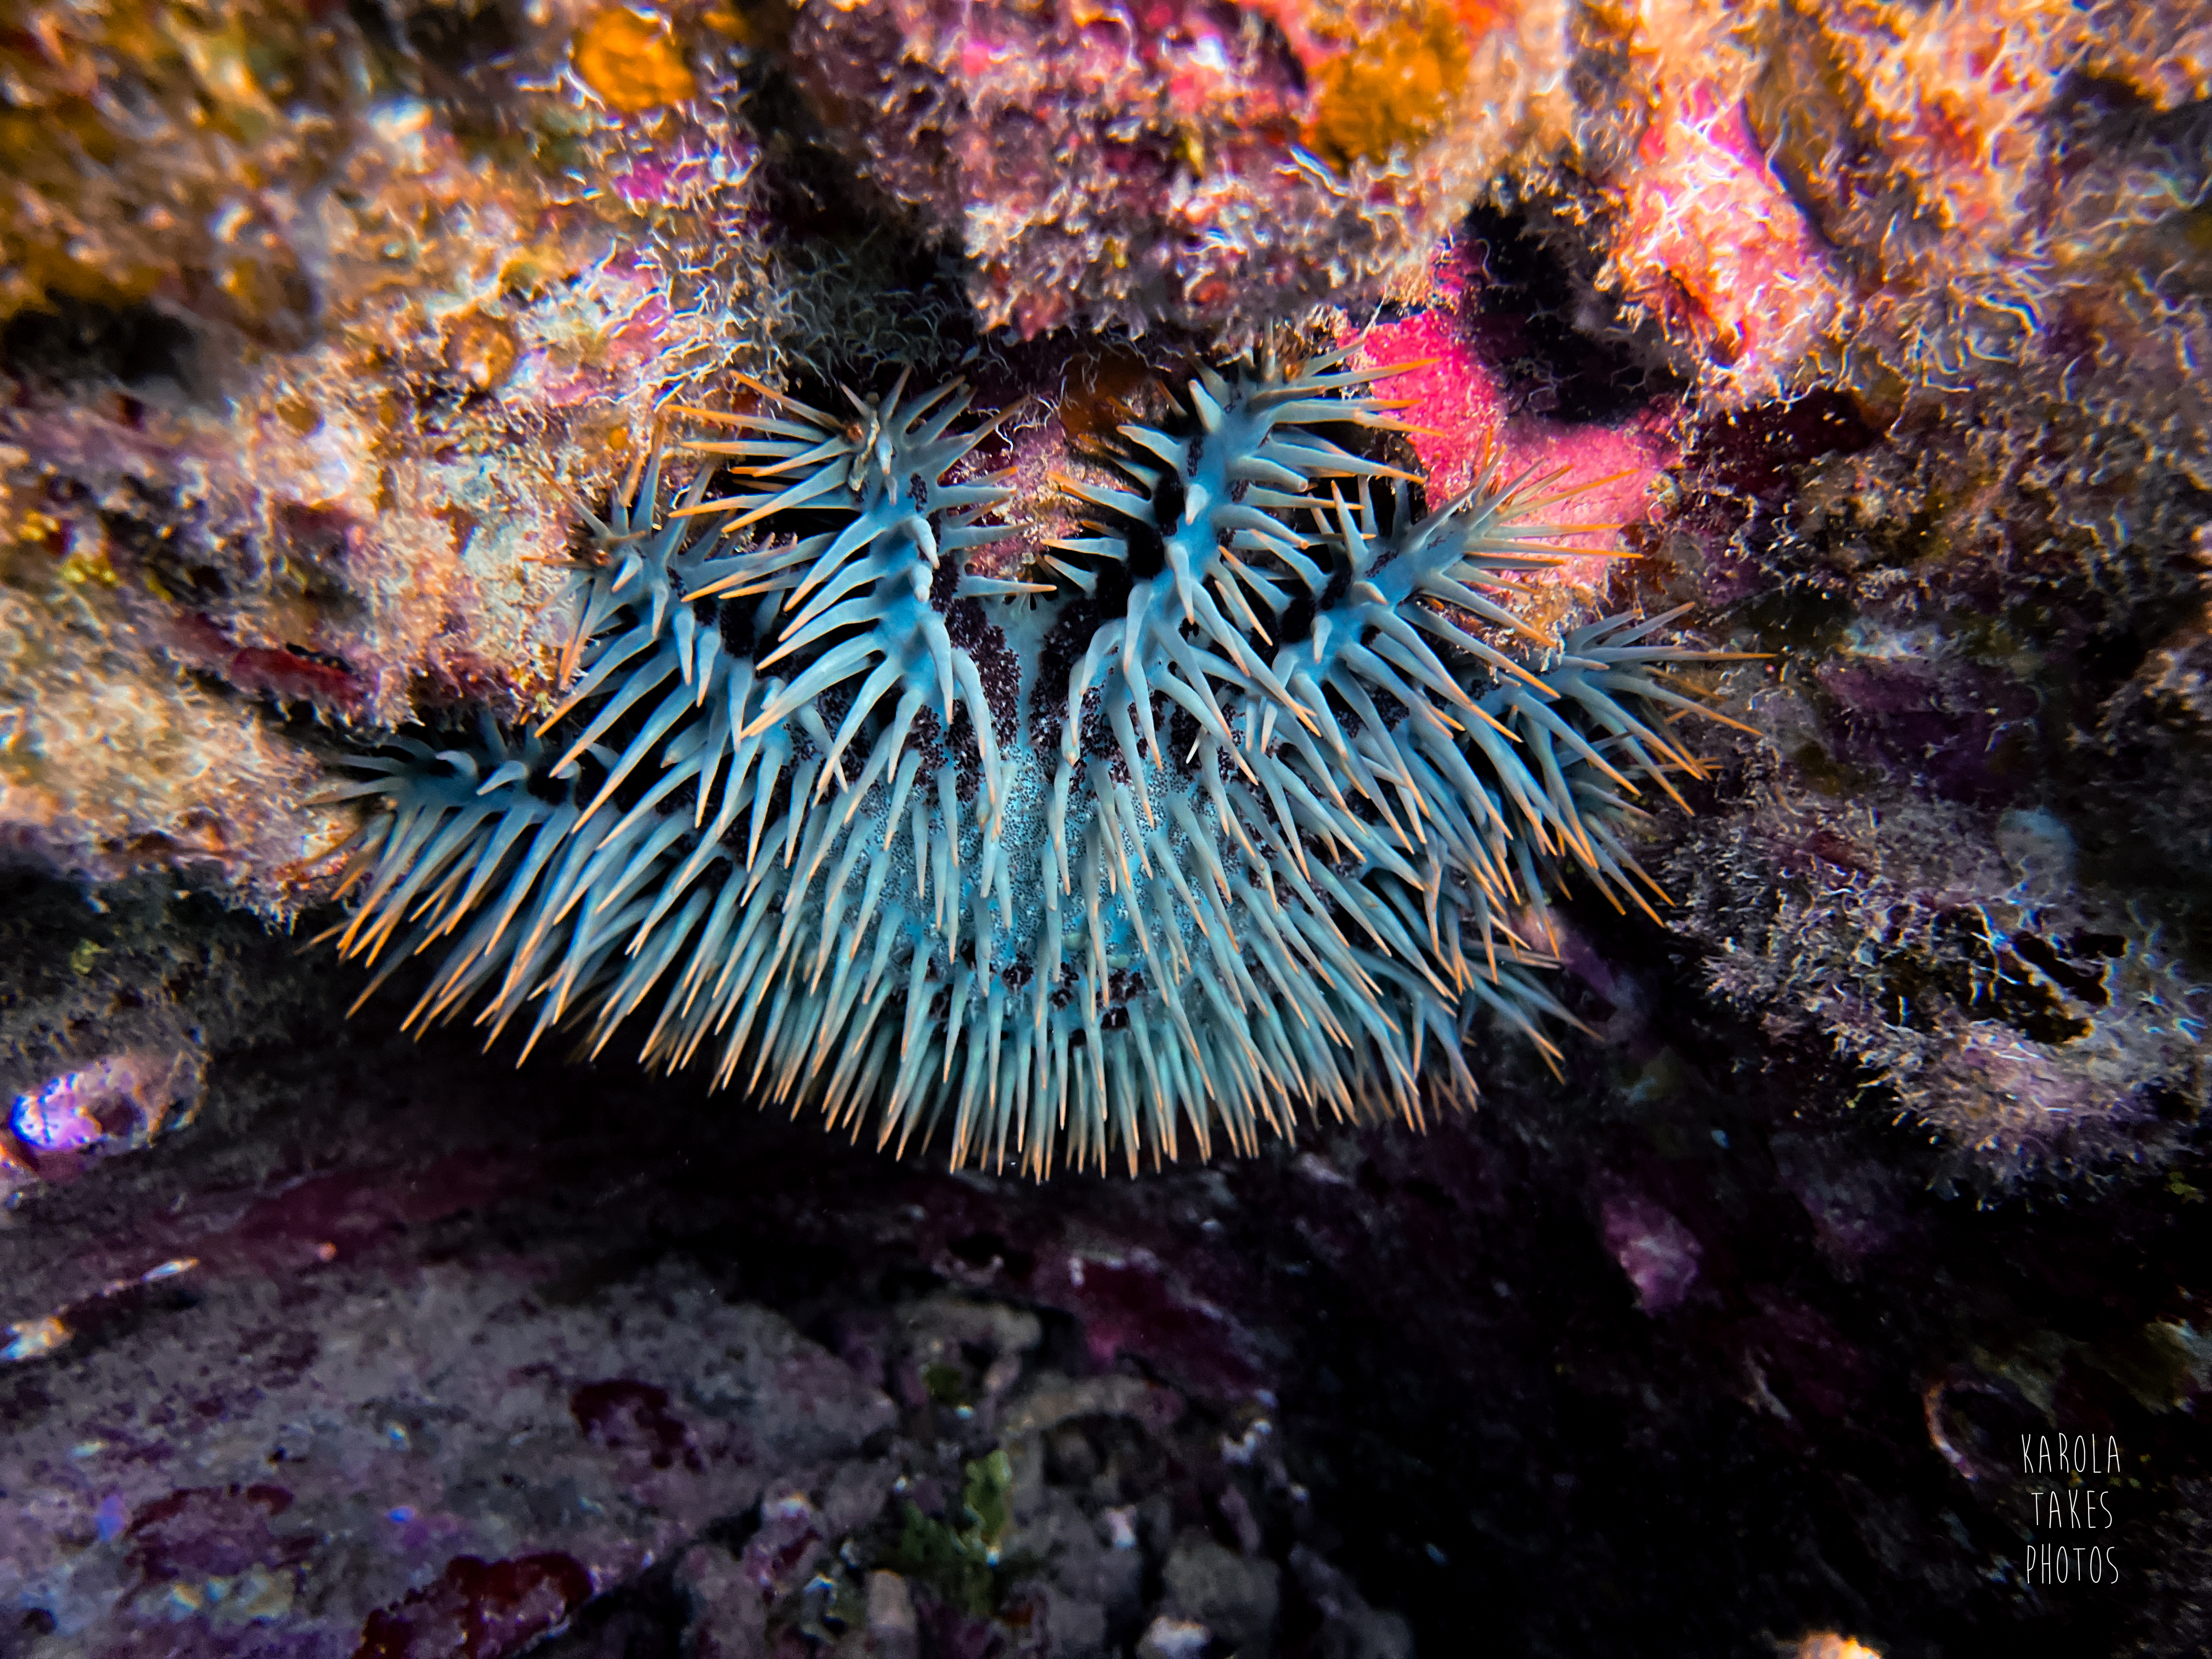 The crown of thorns starfish